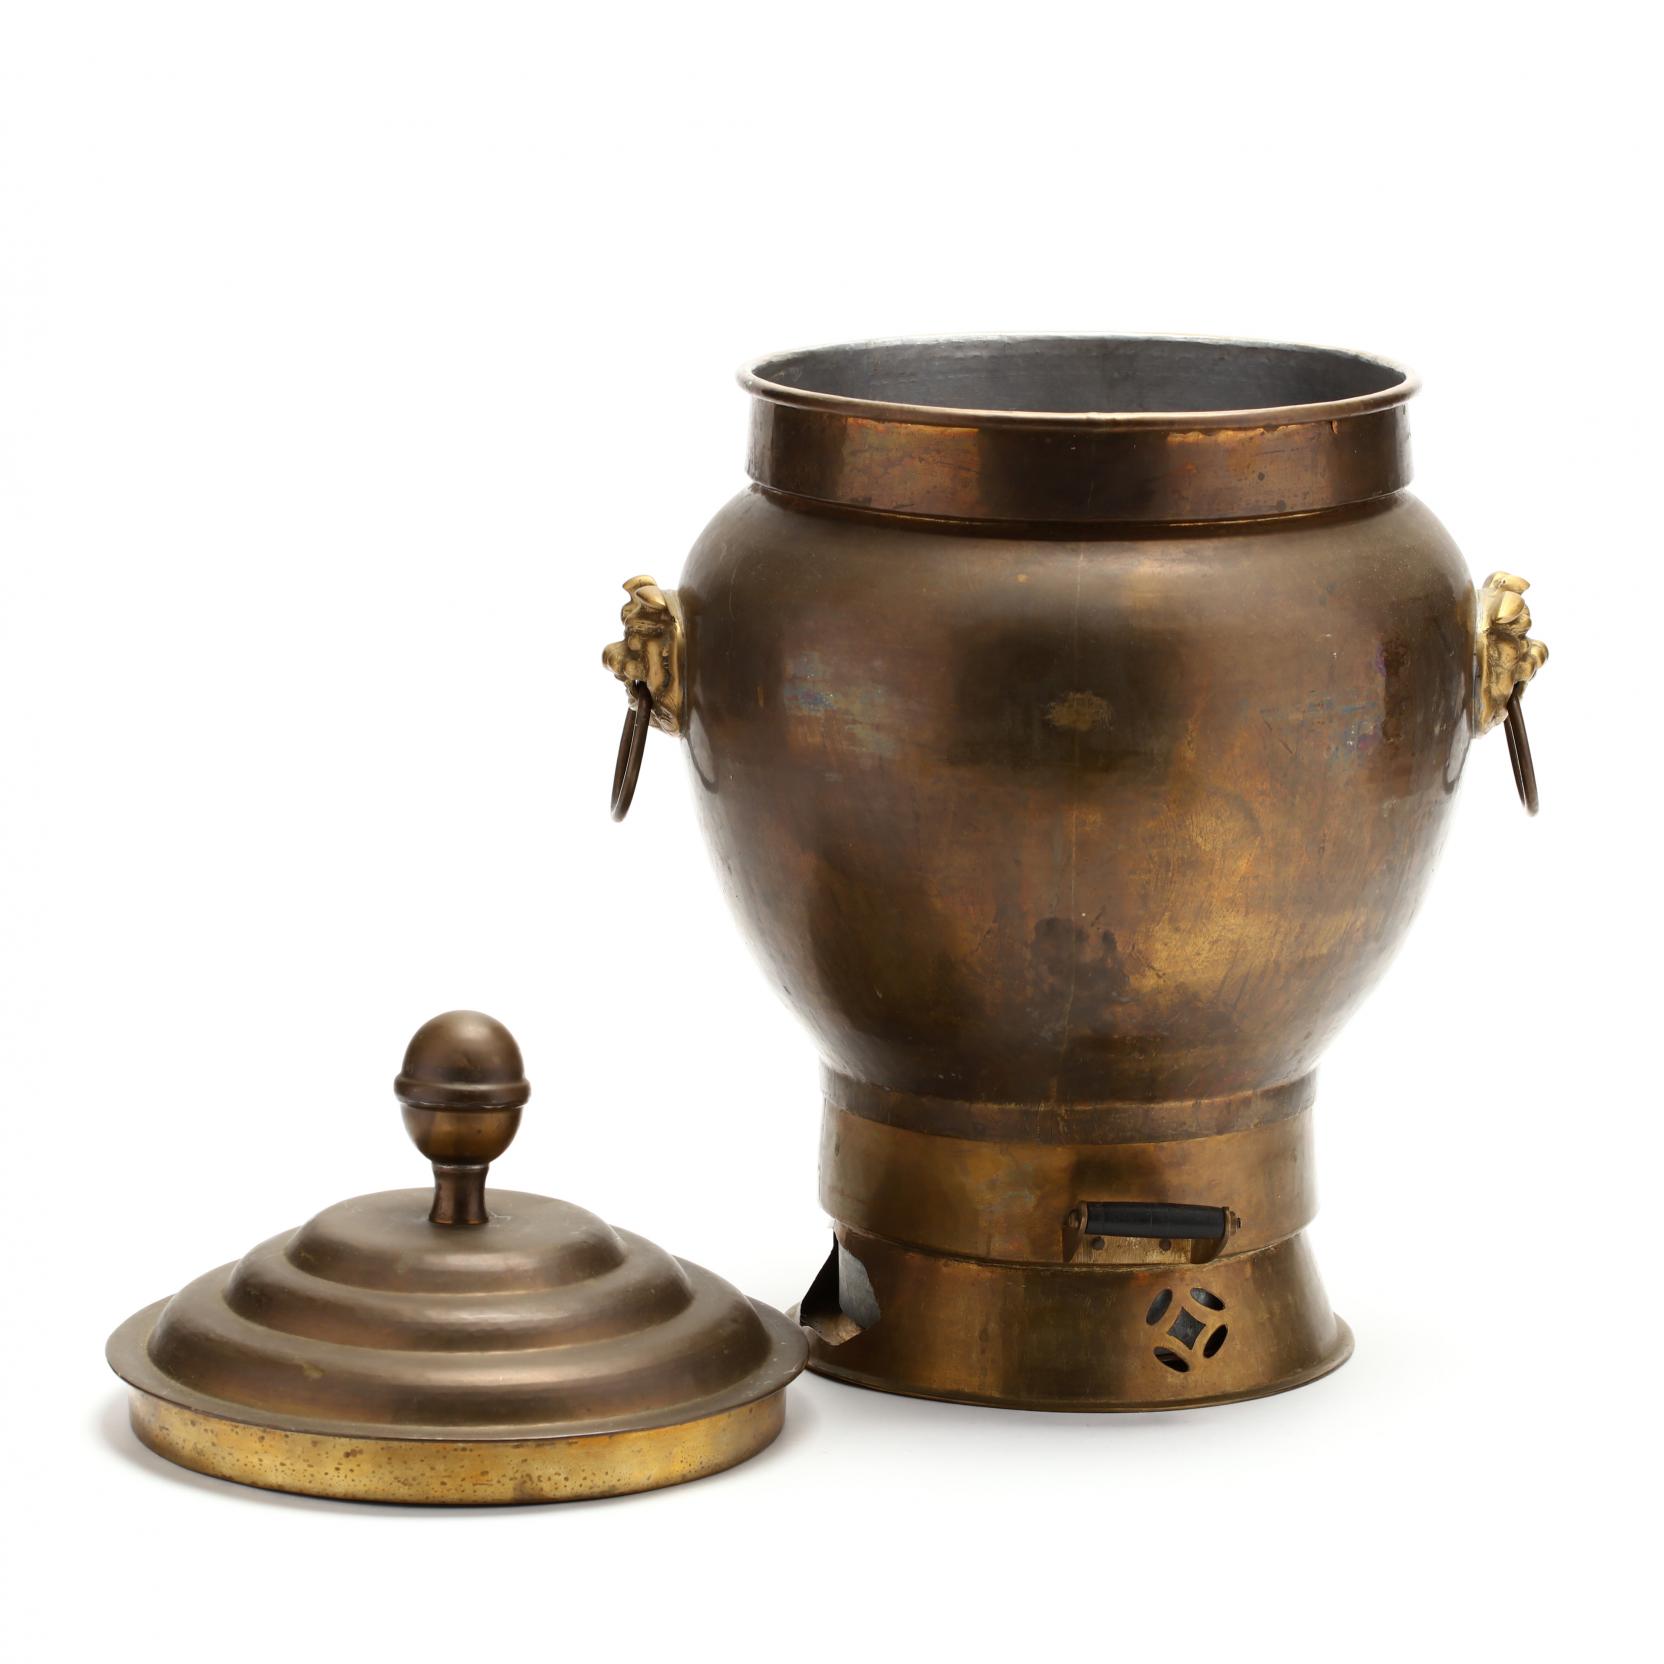 A Vintage Chinese Brass Water Dispenser (Lot 16 - October Gallery  AuctionOct 27, 2018, 9:00am)